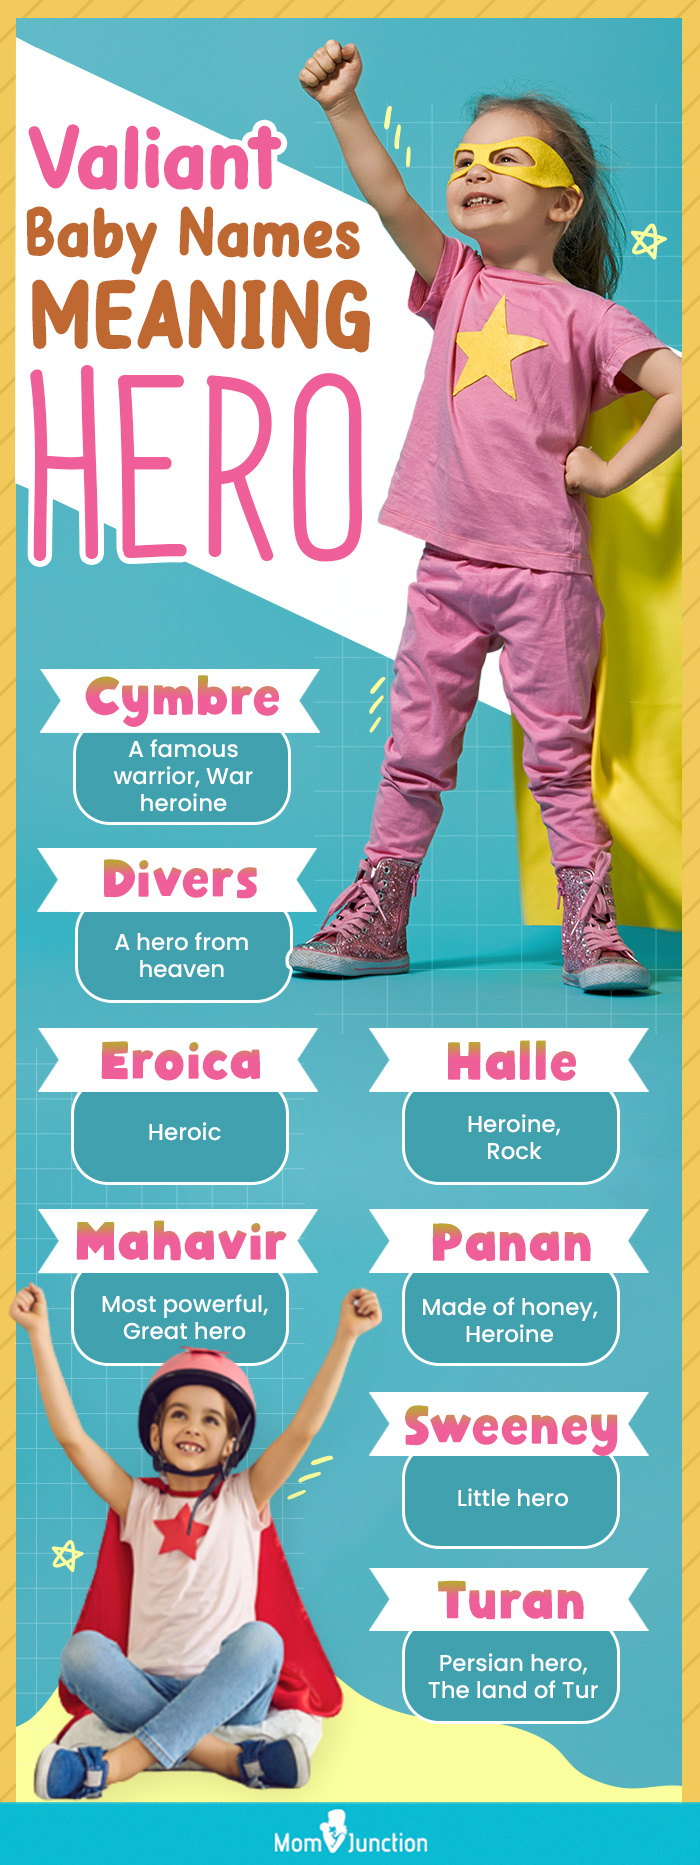 valiant baby names meaning hero (infographic)